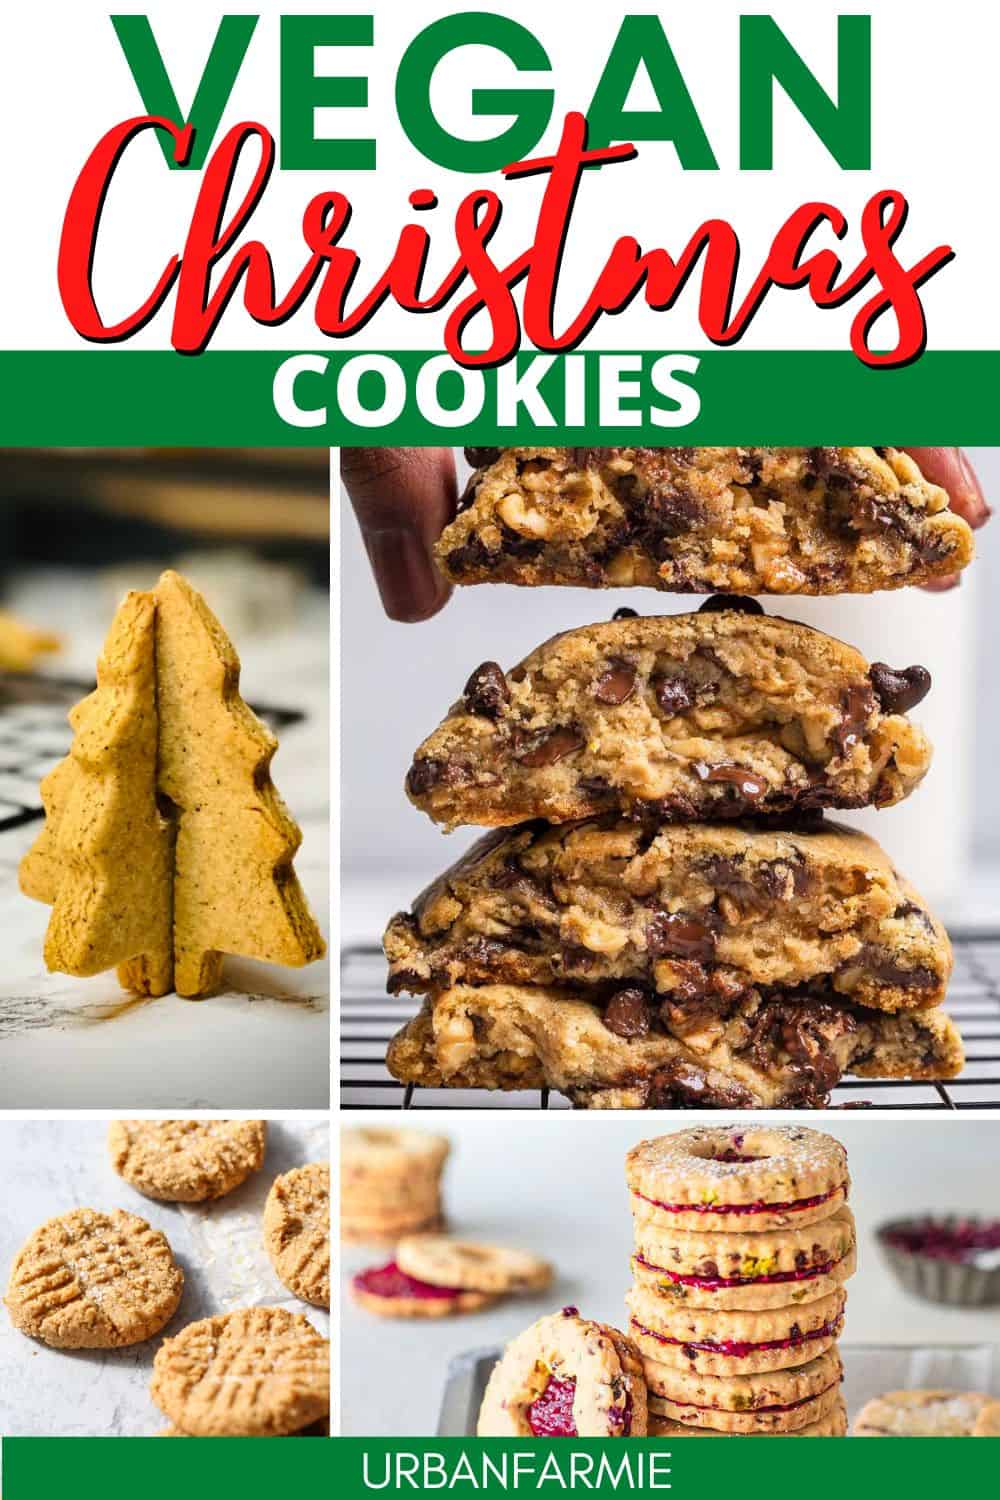 Collage of four vegan Christmas cookies with post title in green and red Christmas-esque font.